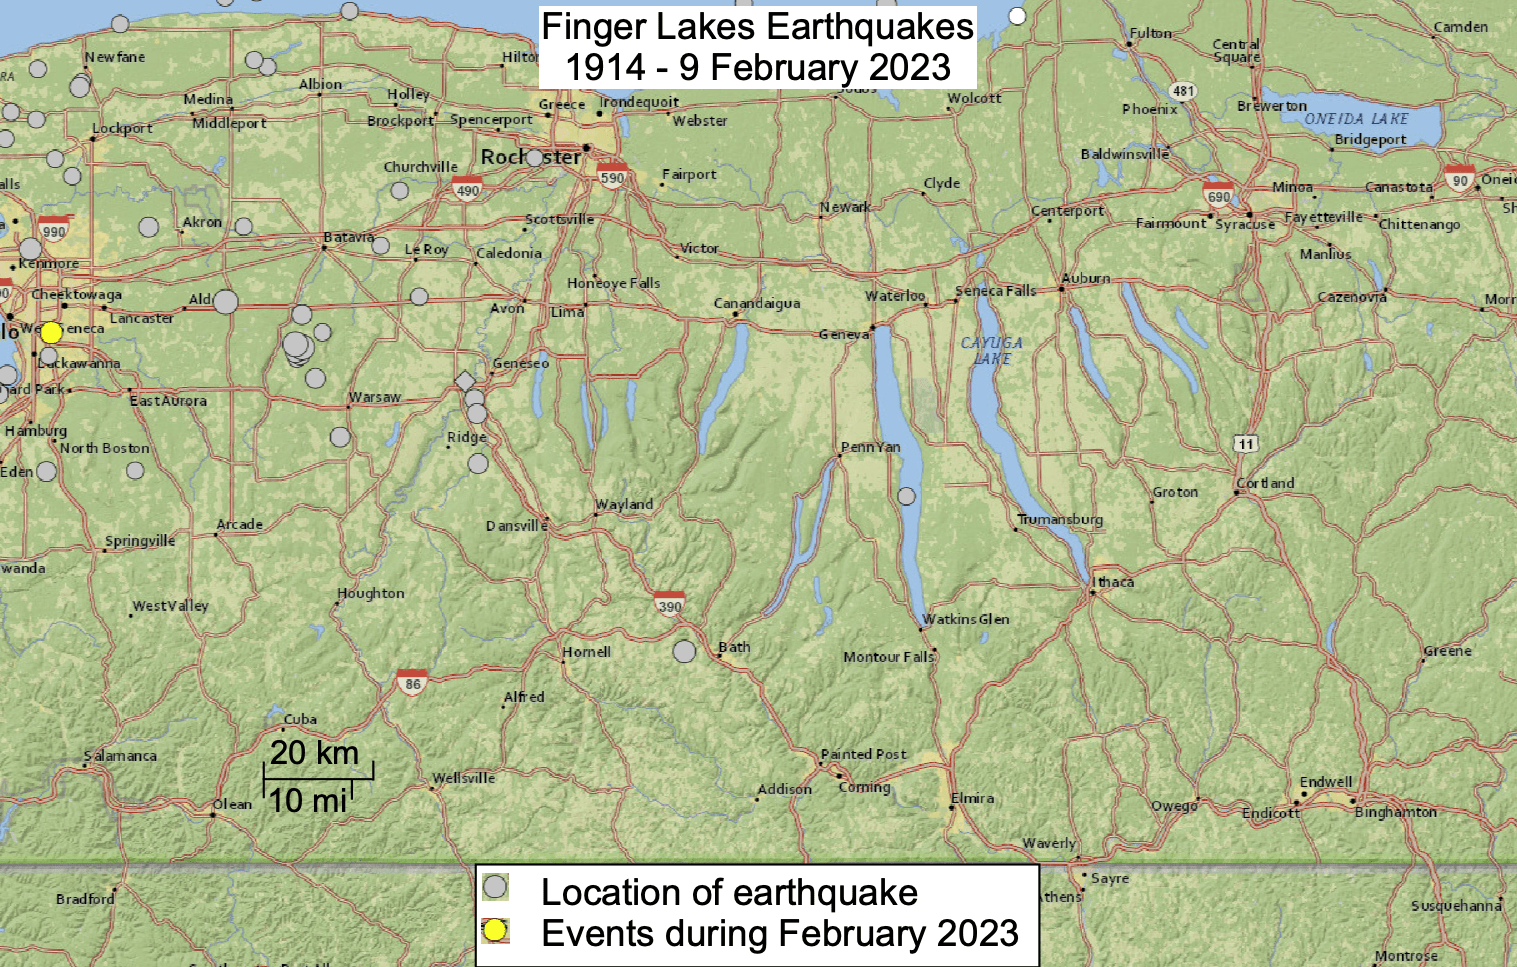 Earthquakes in the Finger Lakes region of New York State, from 1914 through 9 February 2023. The information is from the earthquake catalog of the U.S. Geological Survey.